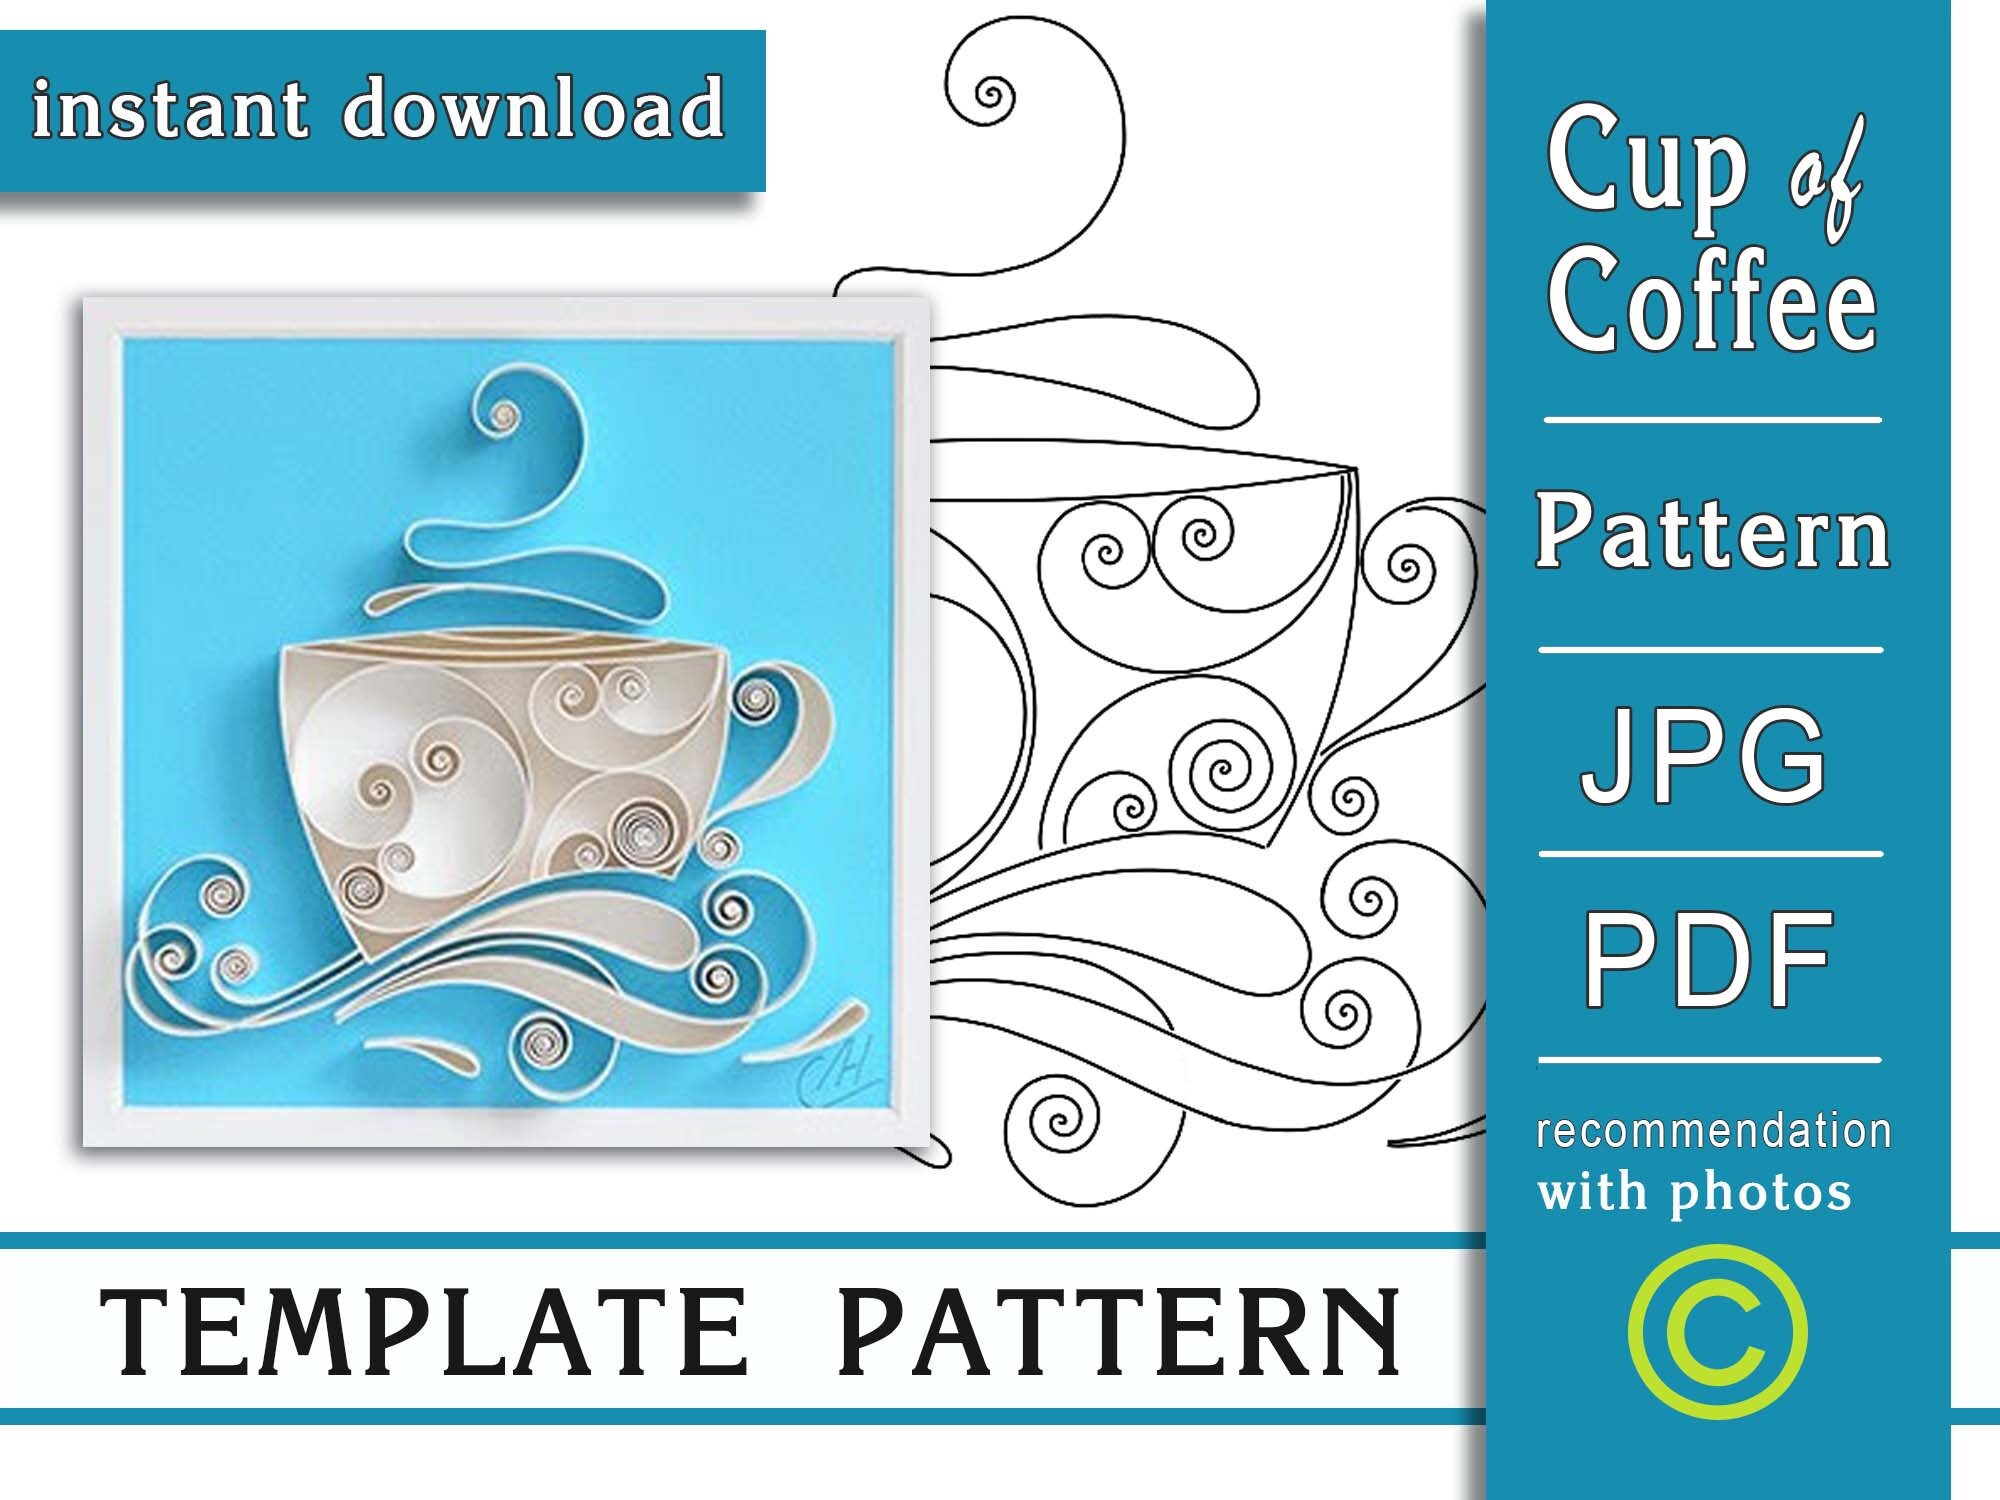 Printable+Quilling+Templates,  quilling quilling cards quilling  supplies custom quilling qu…